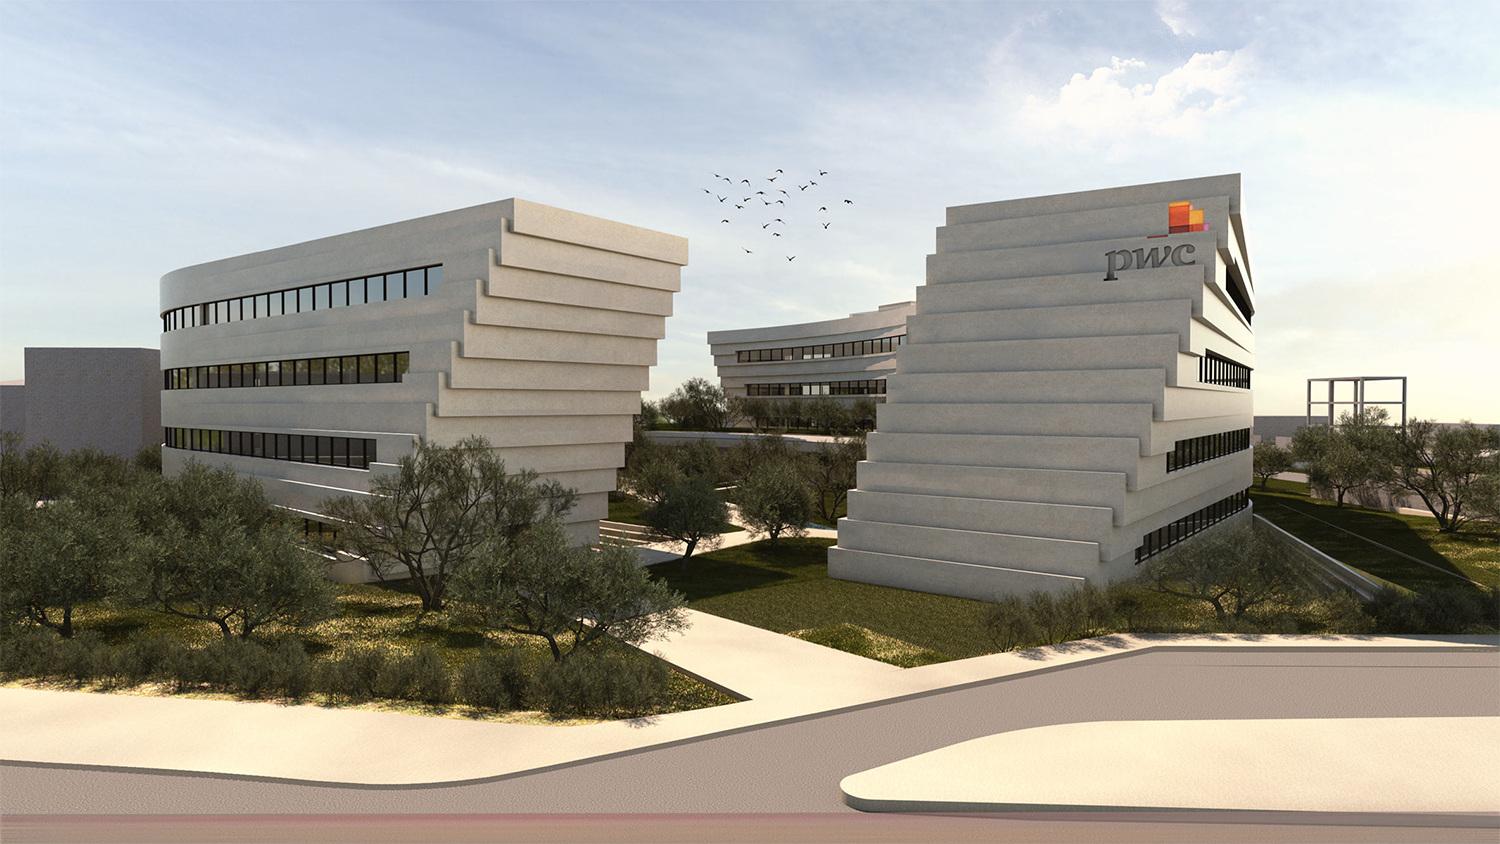 architectural-visualization-3d-rendering-services-exterior-cgi-pwc-offices-athens-greece